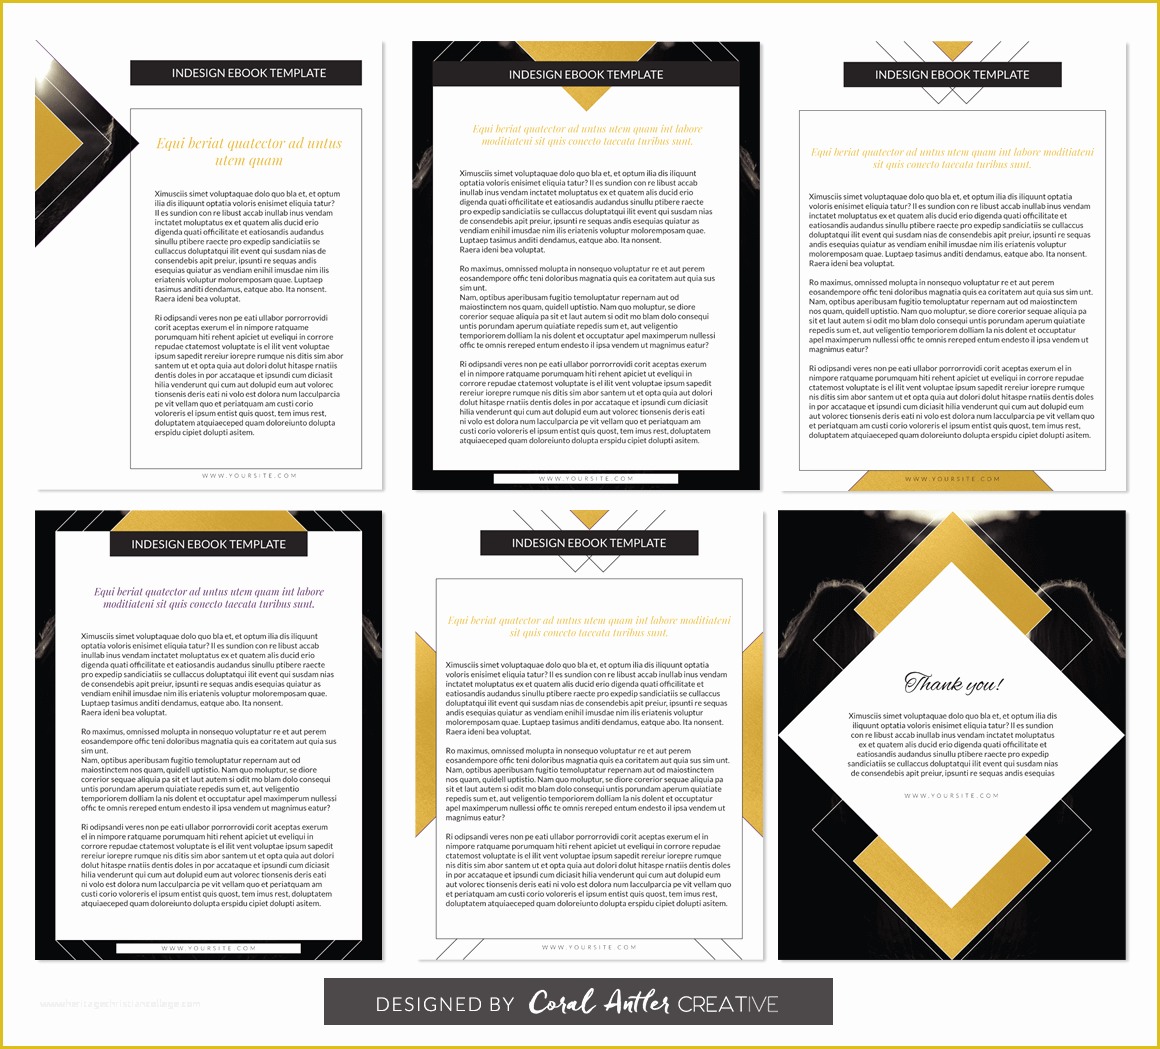 Indesign Ebook Template Free Download Of soul Shine Indesign Ebook Template